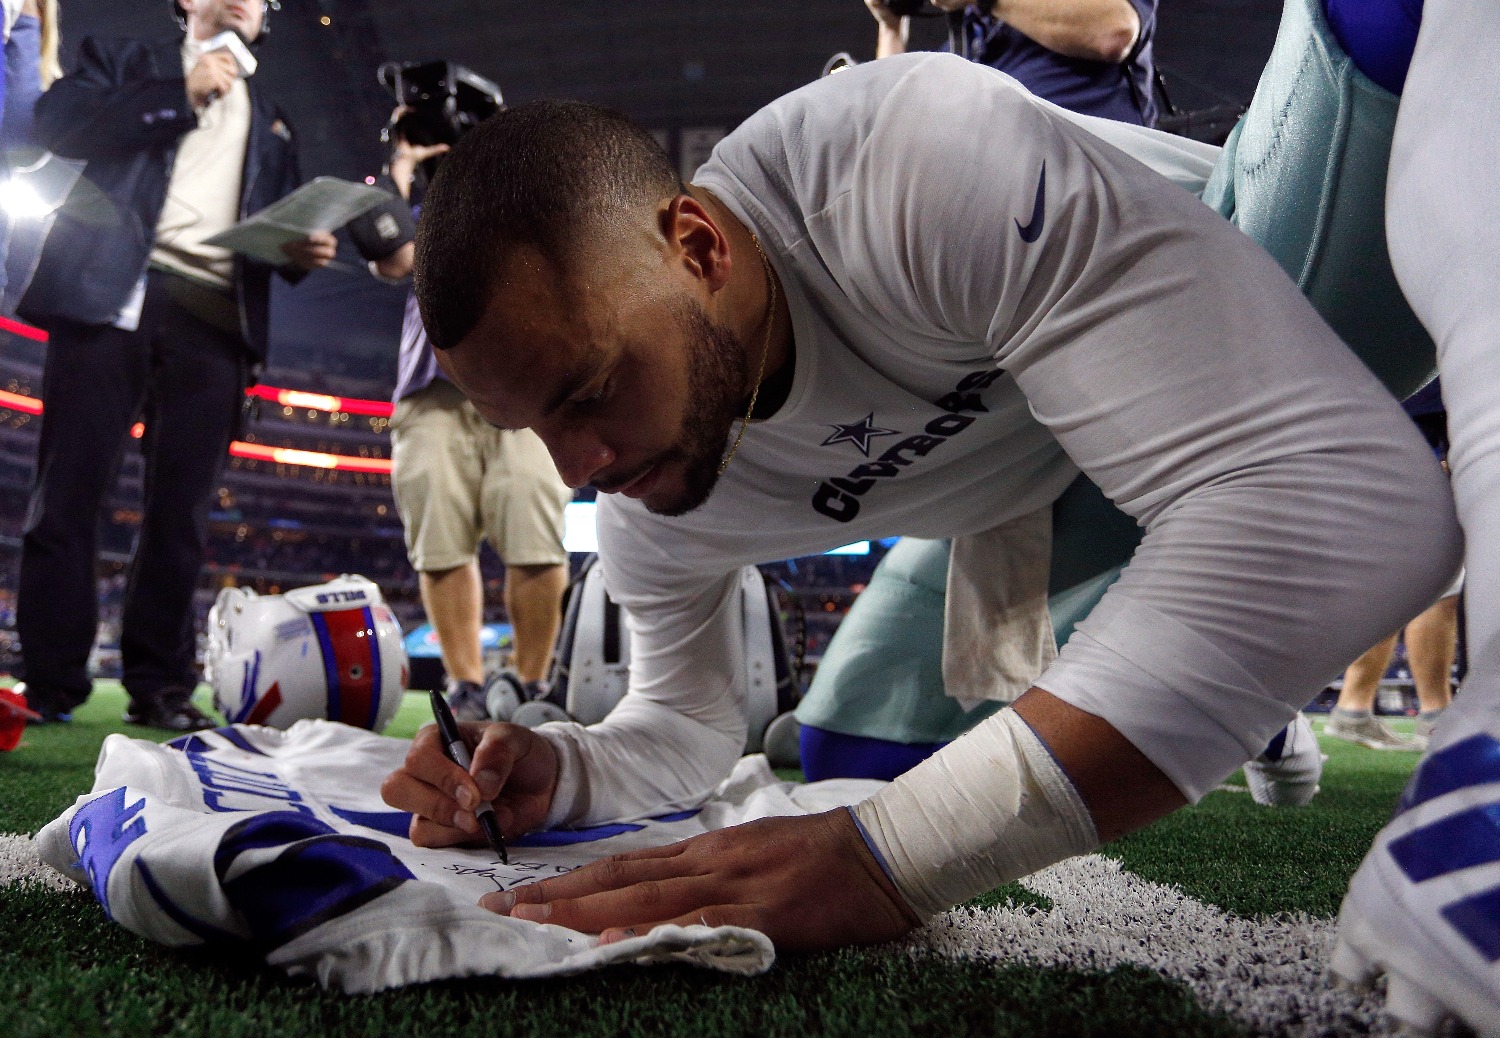 Dak Prescott just wrote a letter that could save a man's life.